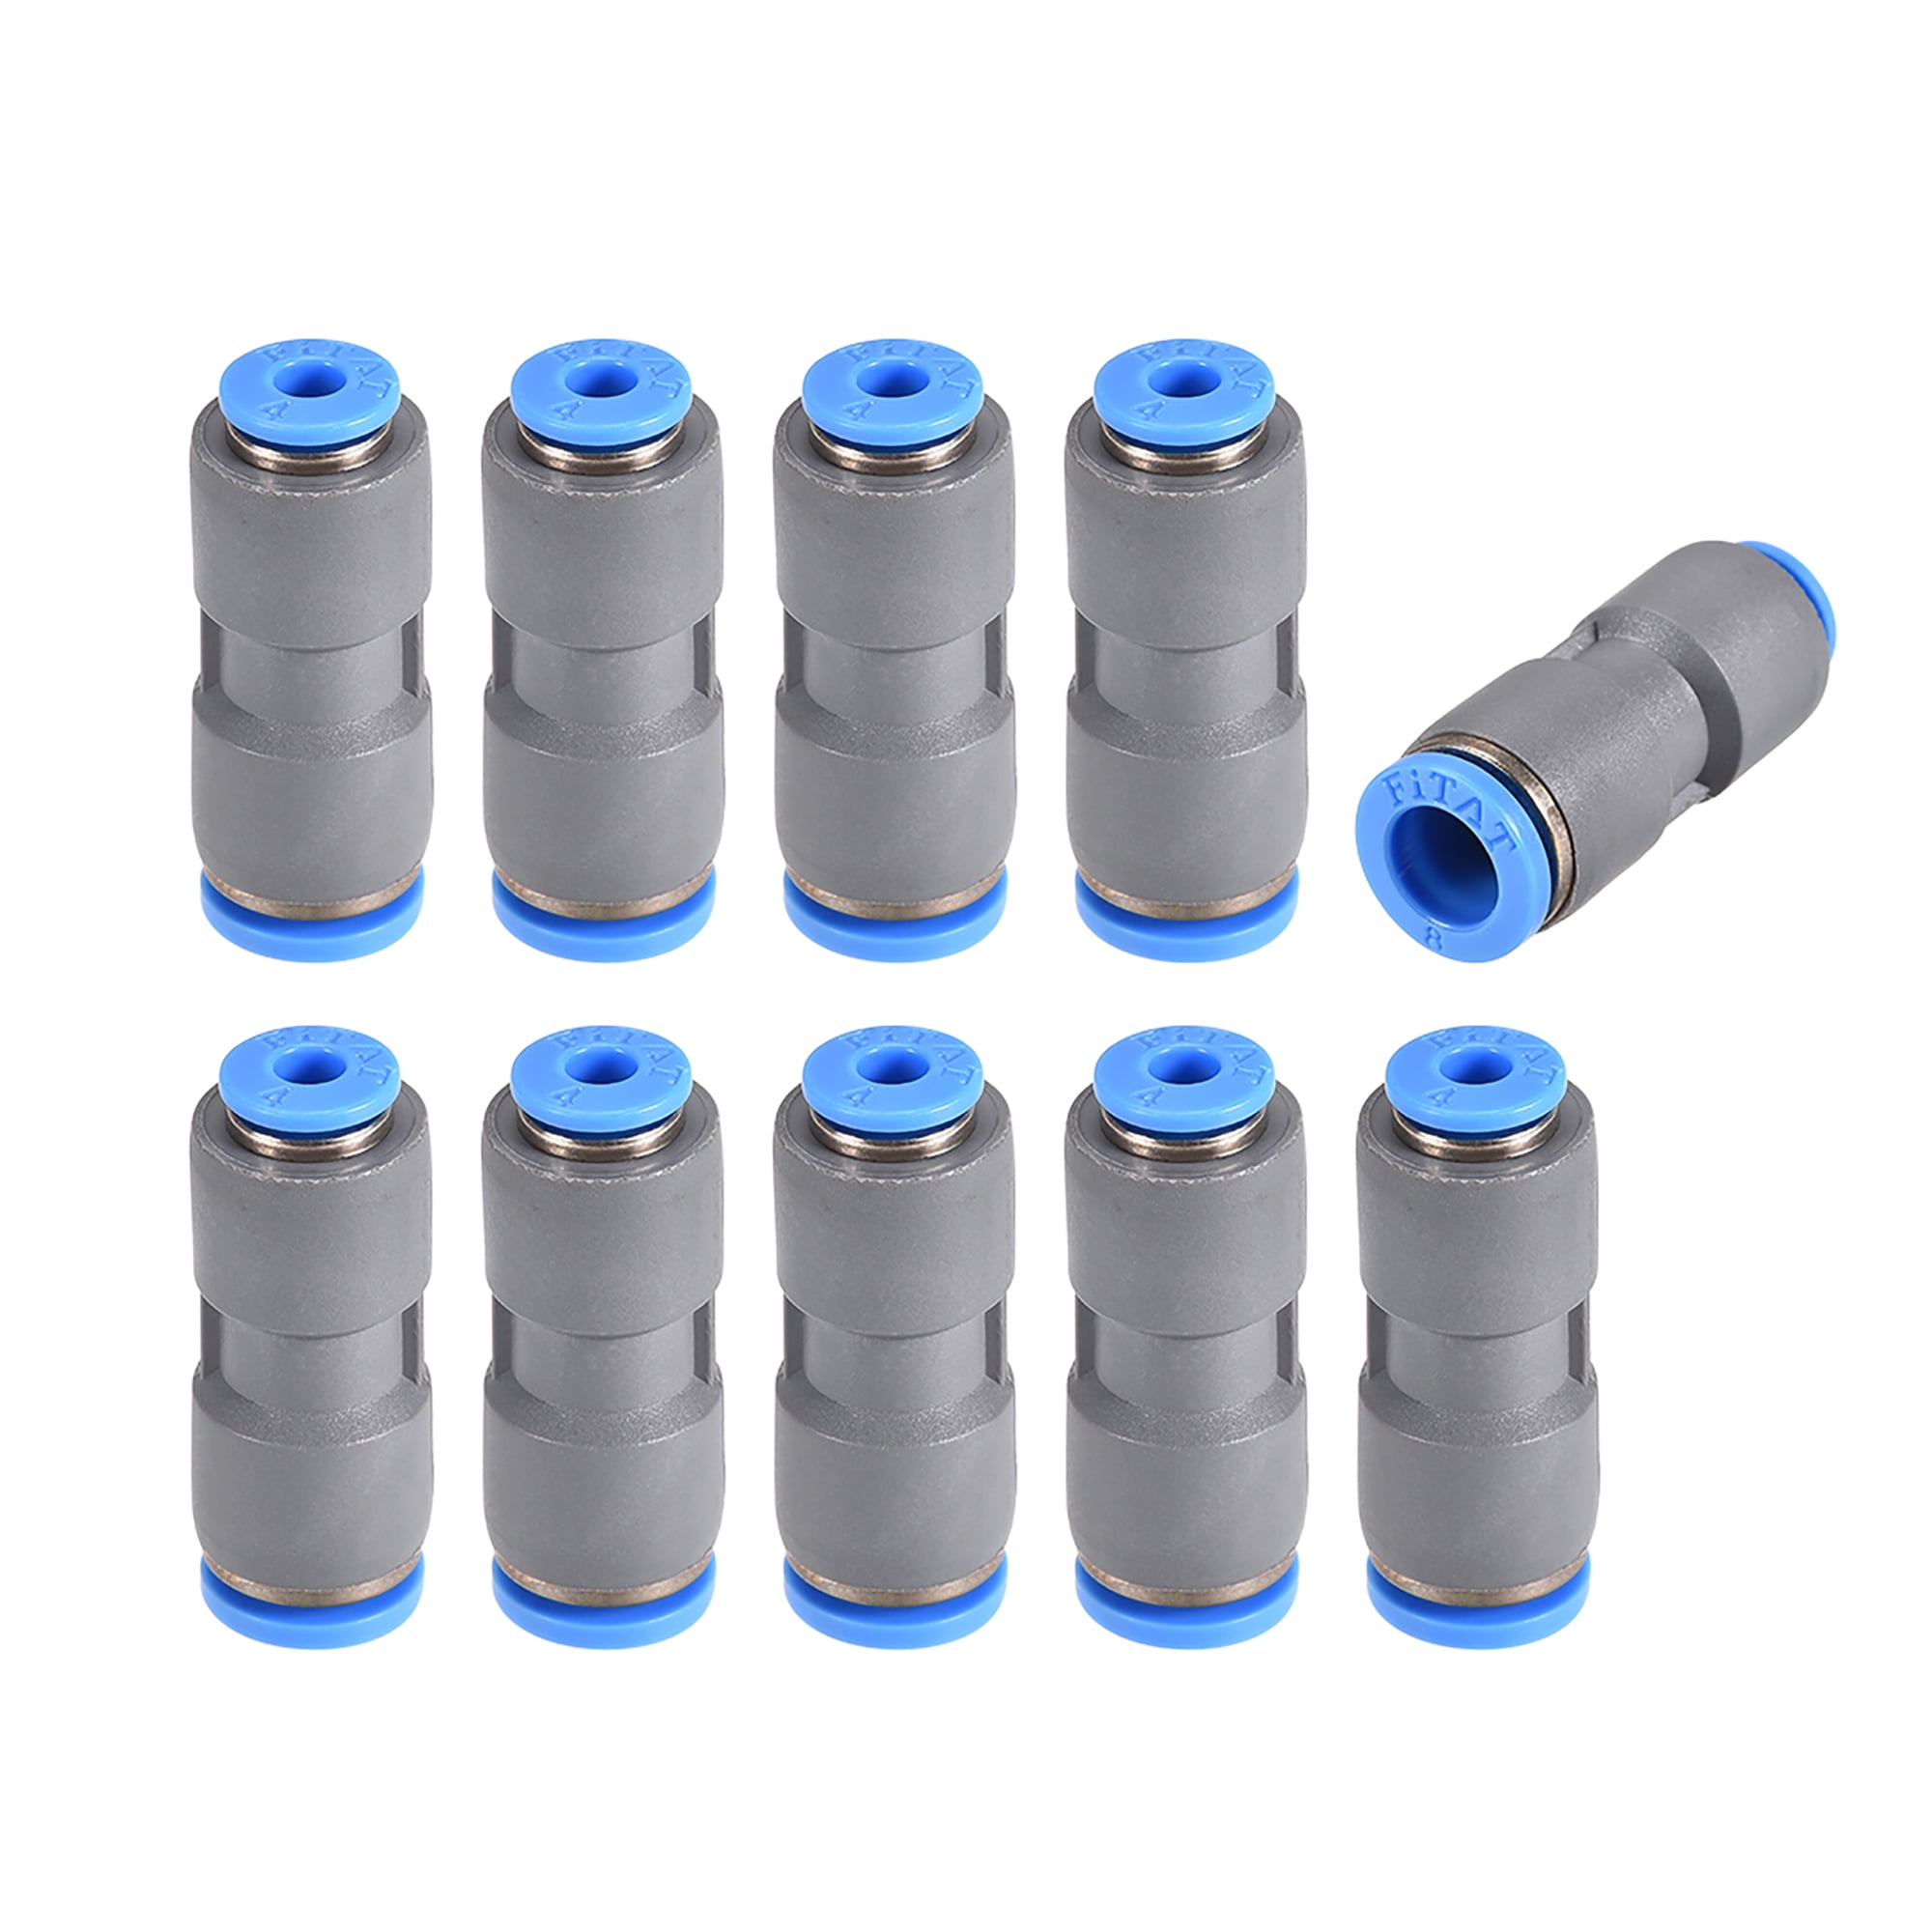 Straight Push Connectors 8mm to 4mm Quick Release Pneumatic Connector Quick Release Button Connectors Telescoping Tubing